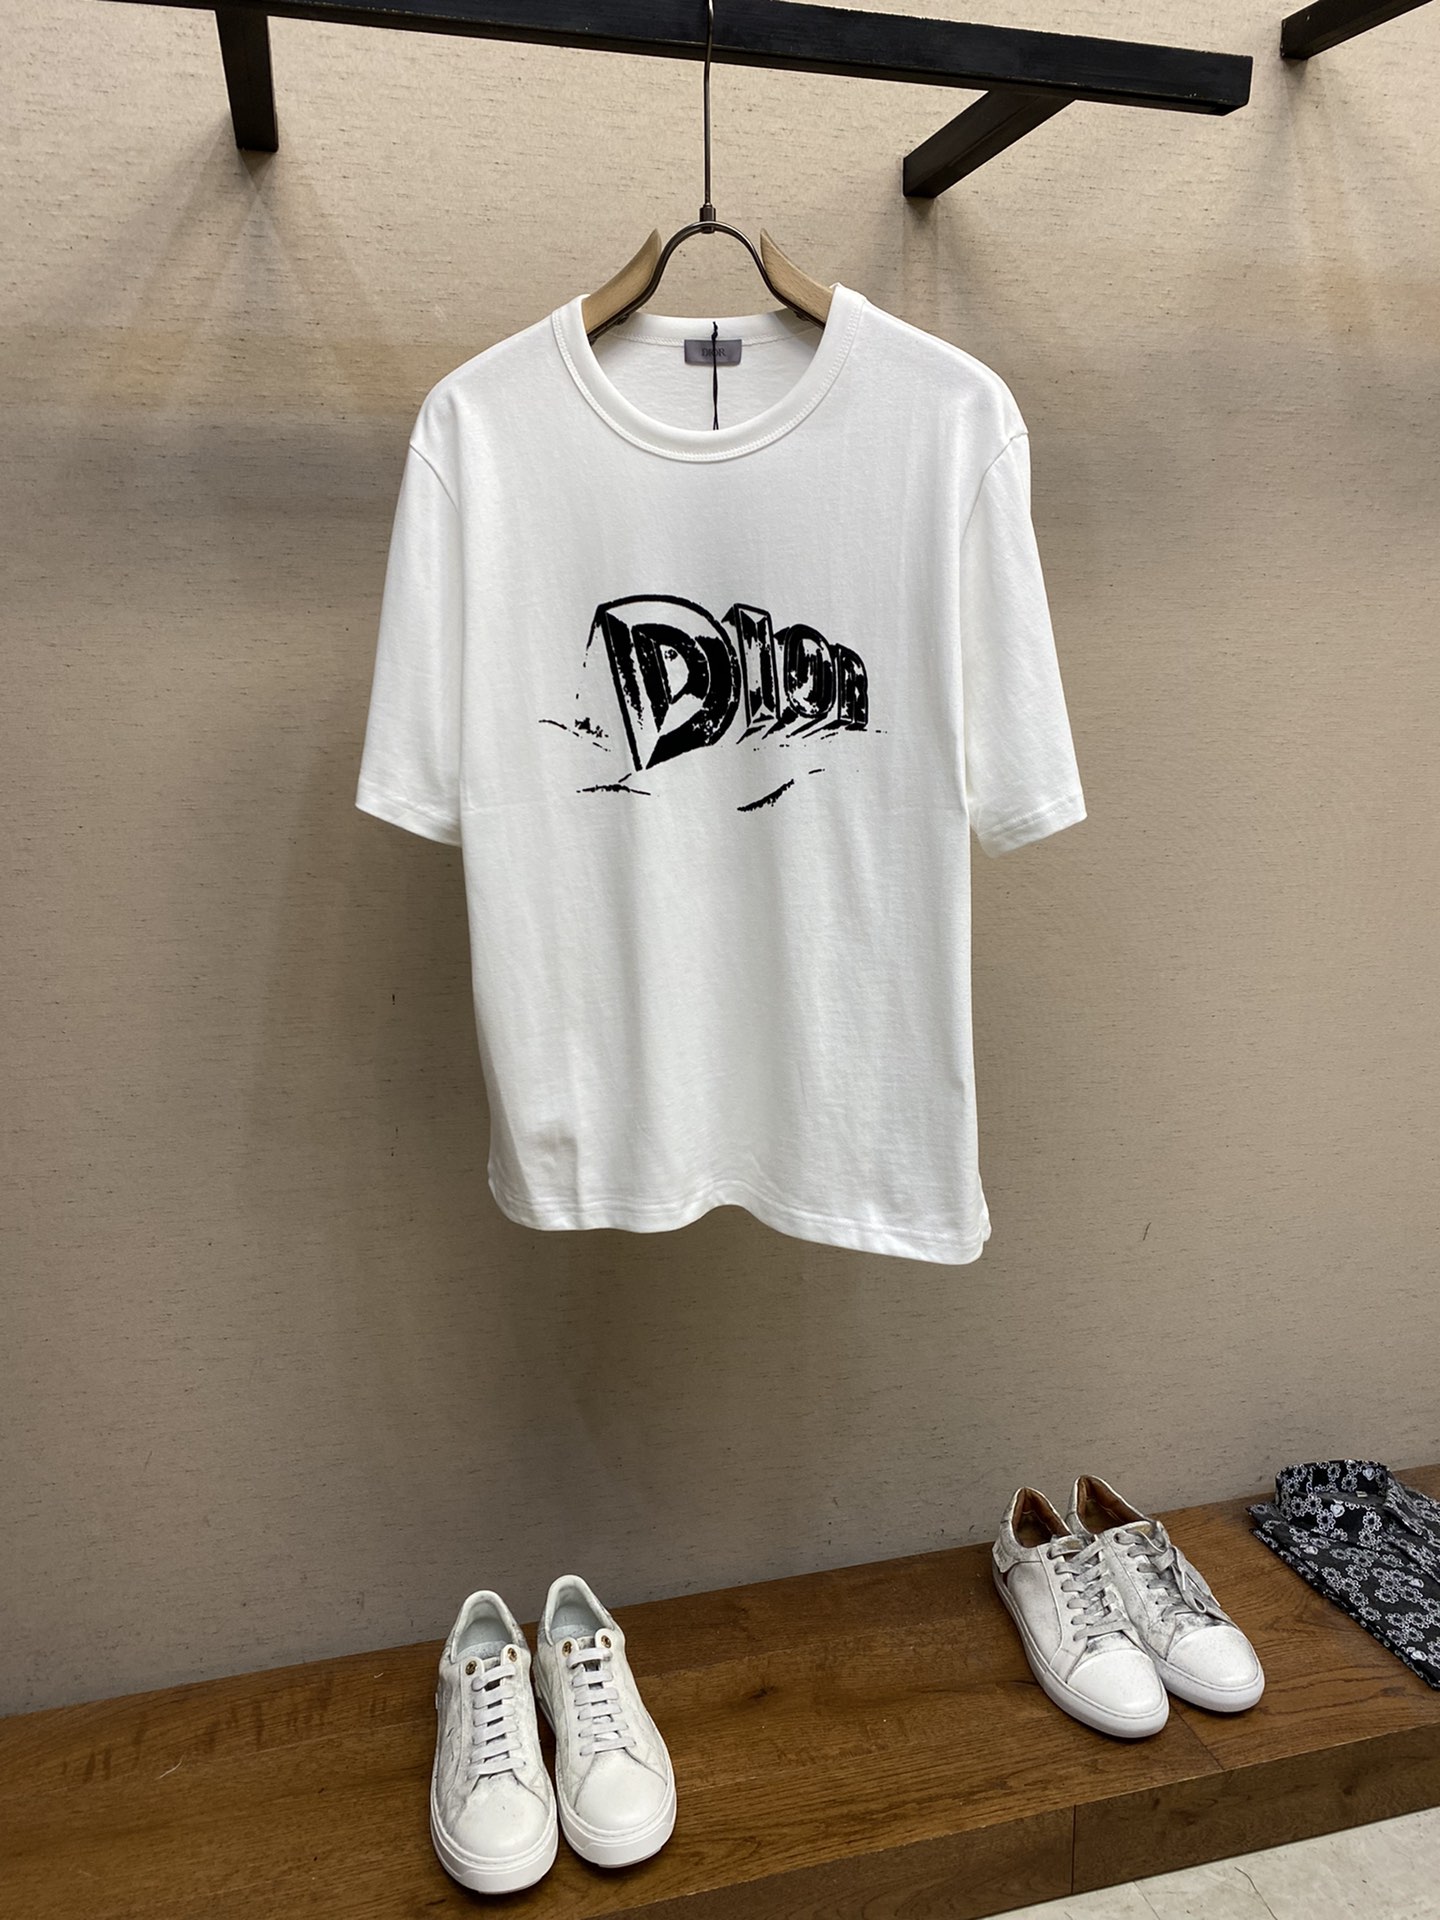 Dior Clothing T-Shirt Unisex Cotton Spring/Summer Collection Fashion Short Sleeve